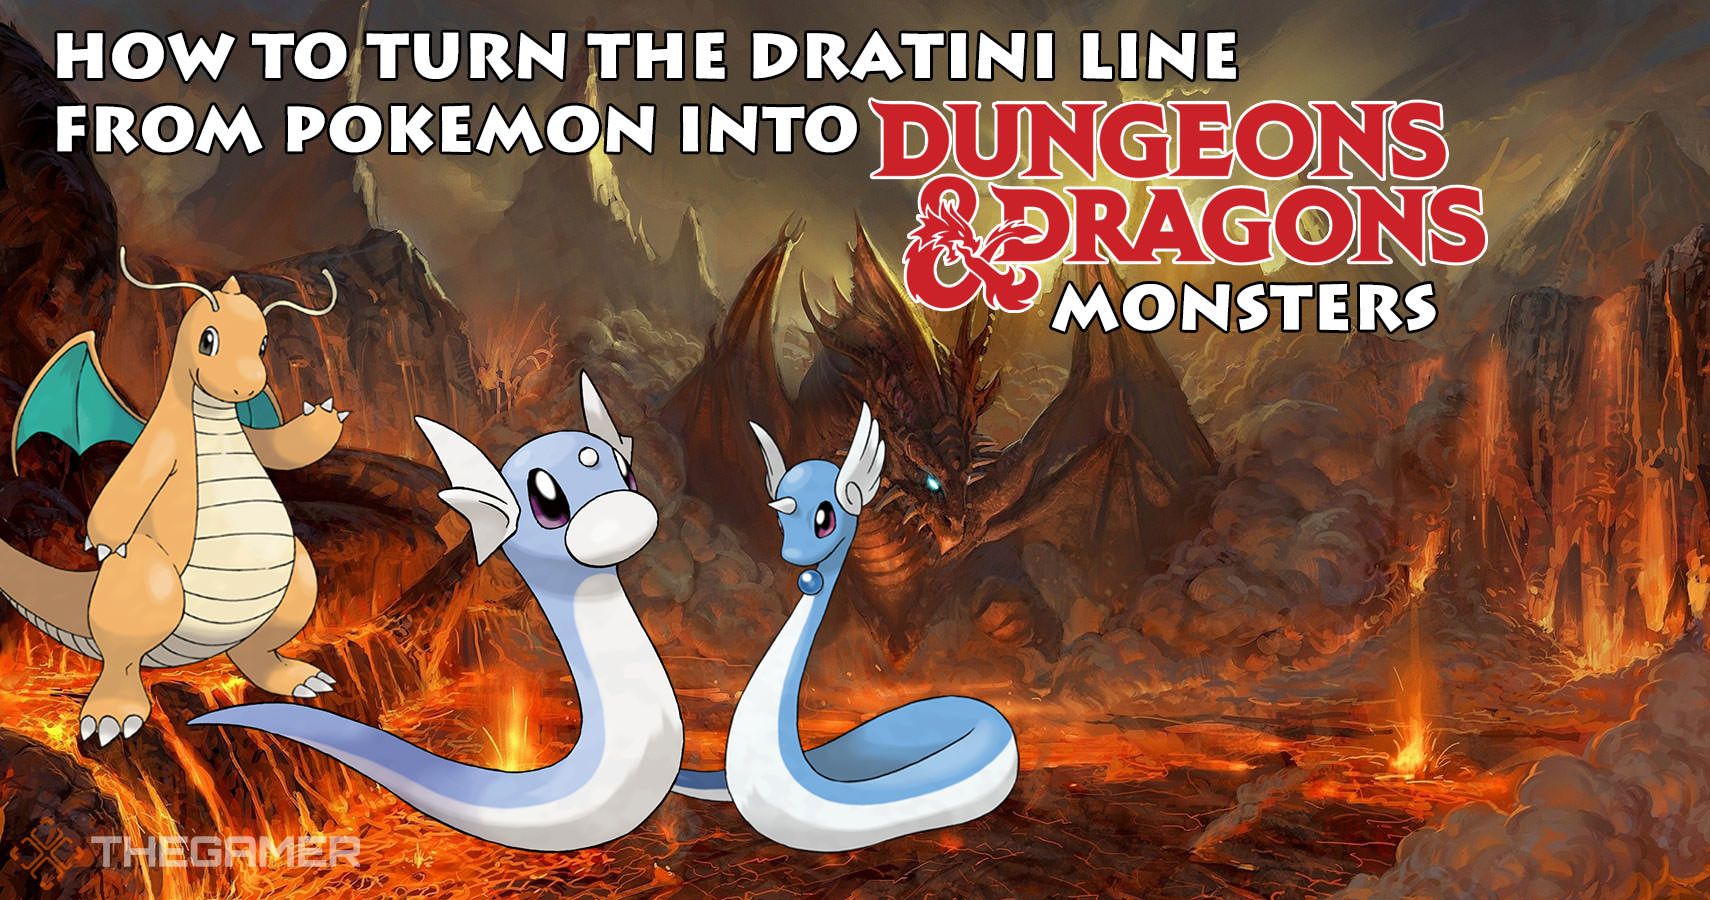 To The Dratini Line From Pokemon D&D Monsters